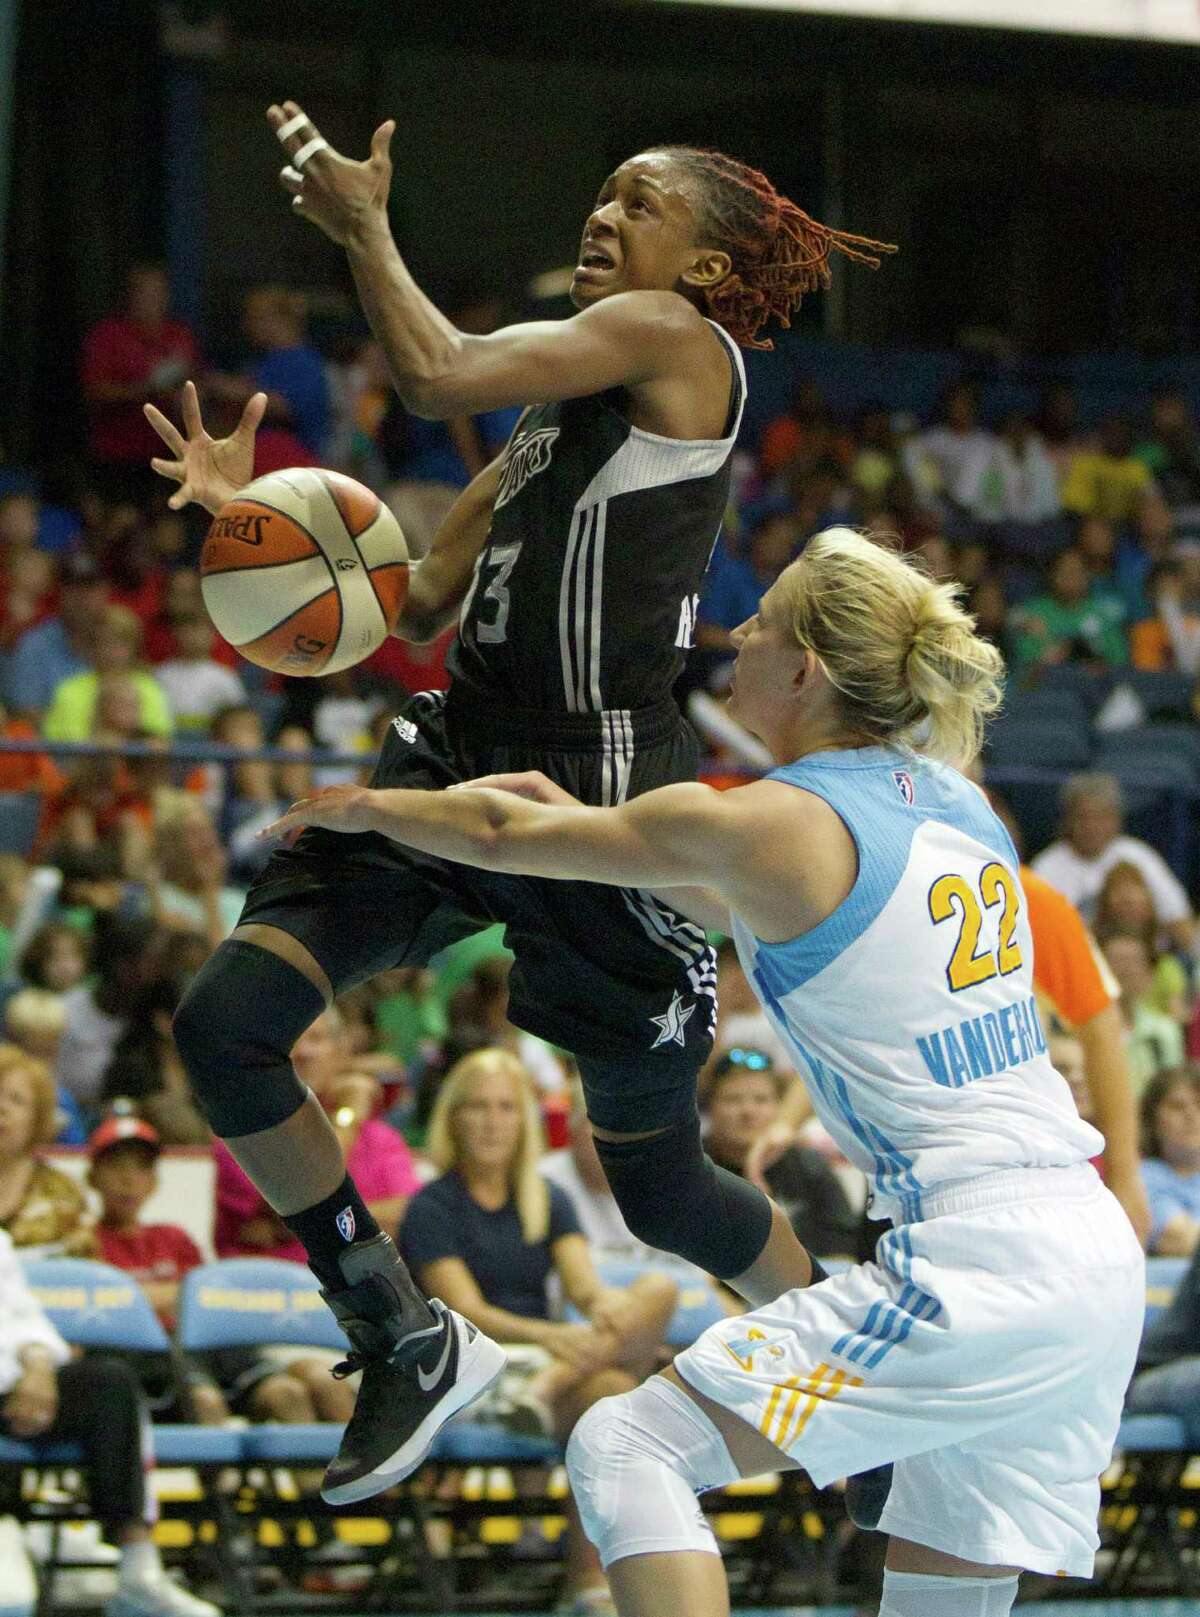 San Antonio Silver Stars' Danielle Robinson, left, is fouled by Chicago Sky's Courtney Vandersloot during the first half of an WNBA basketball game, Wednesday, July 11, 2012, in Rosemont, Ill. (AP Photo/Charles Rex Arbogast)